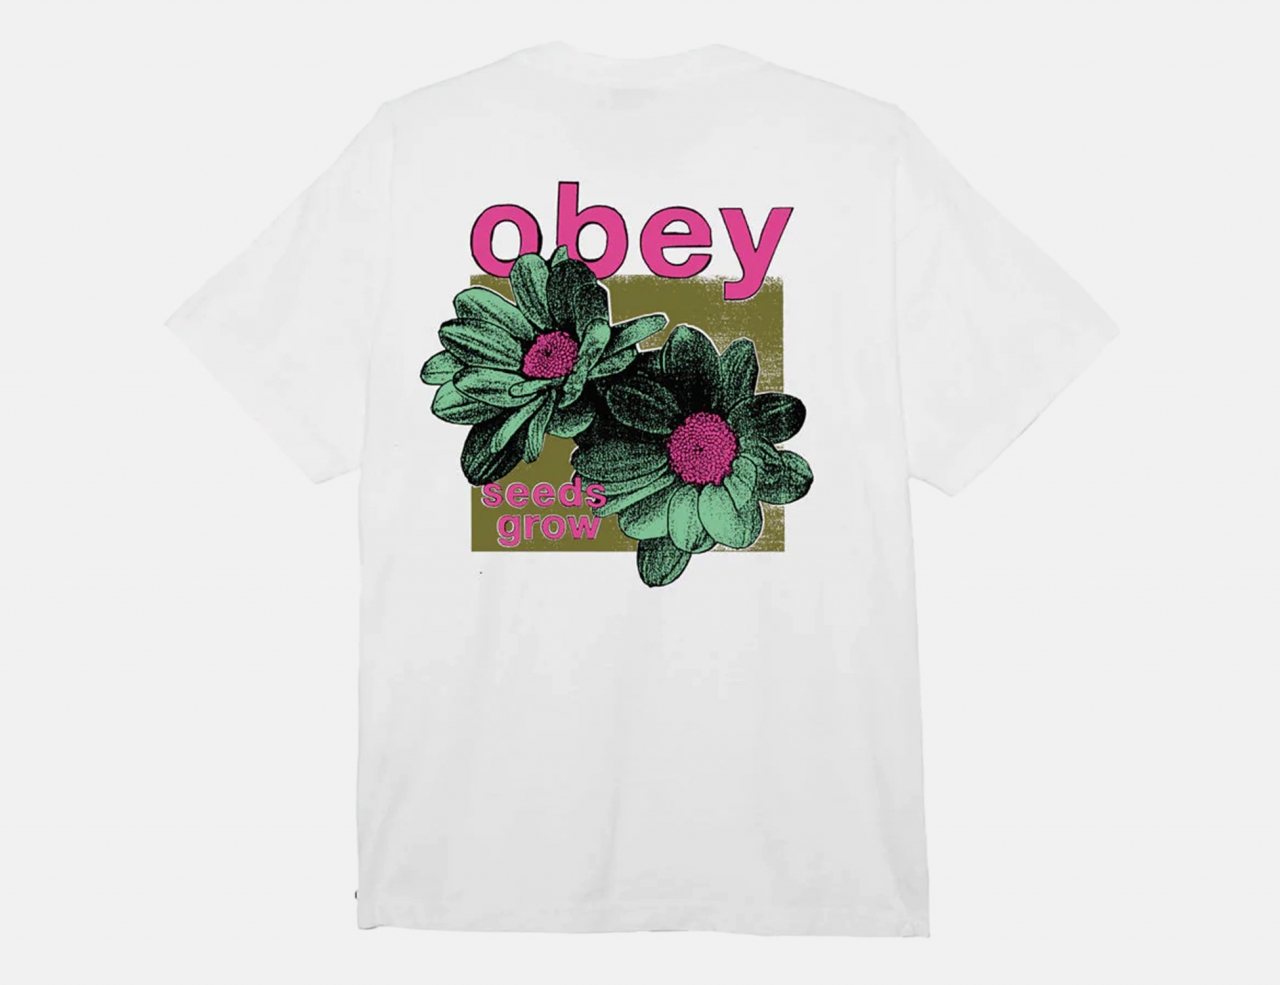 Obey Seeds Grow T-Shirt - White